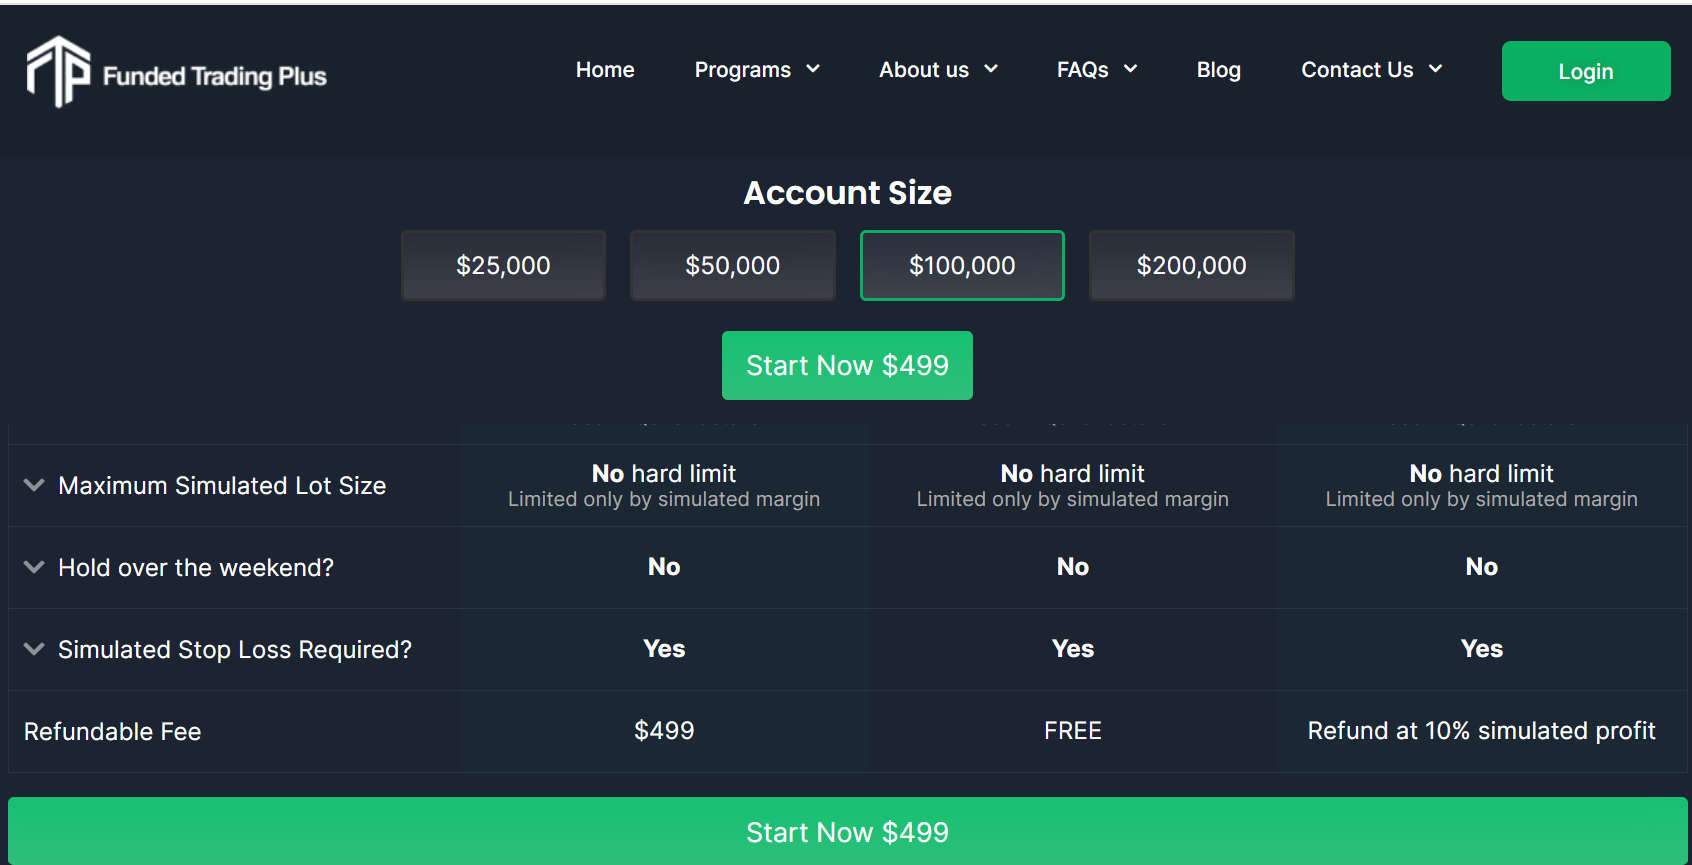 Funded Trading Plus: Steps to chose an account size.